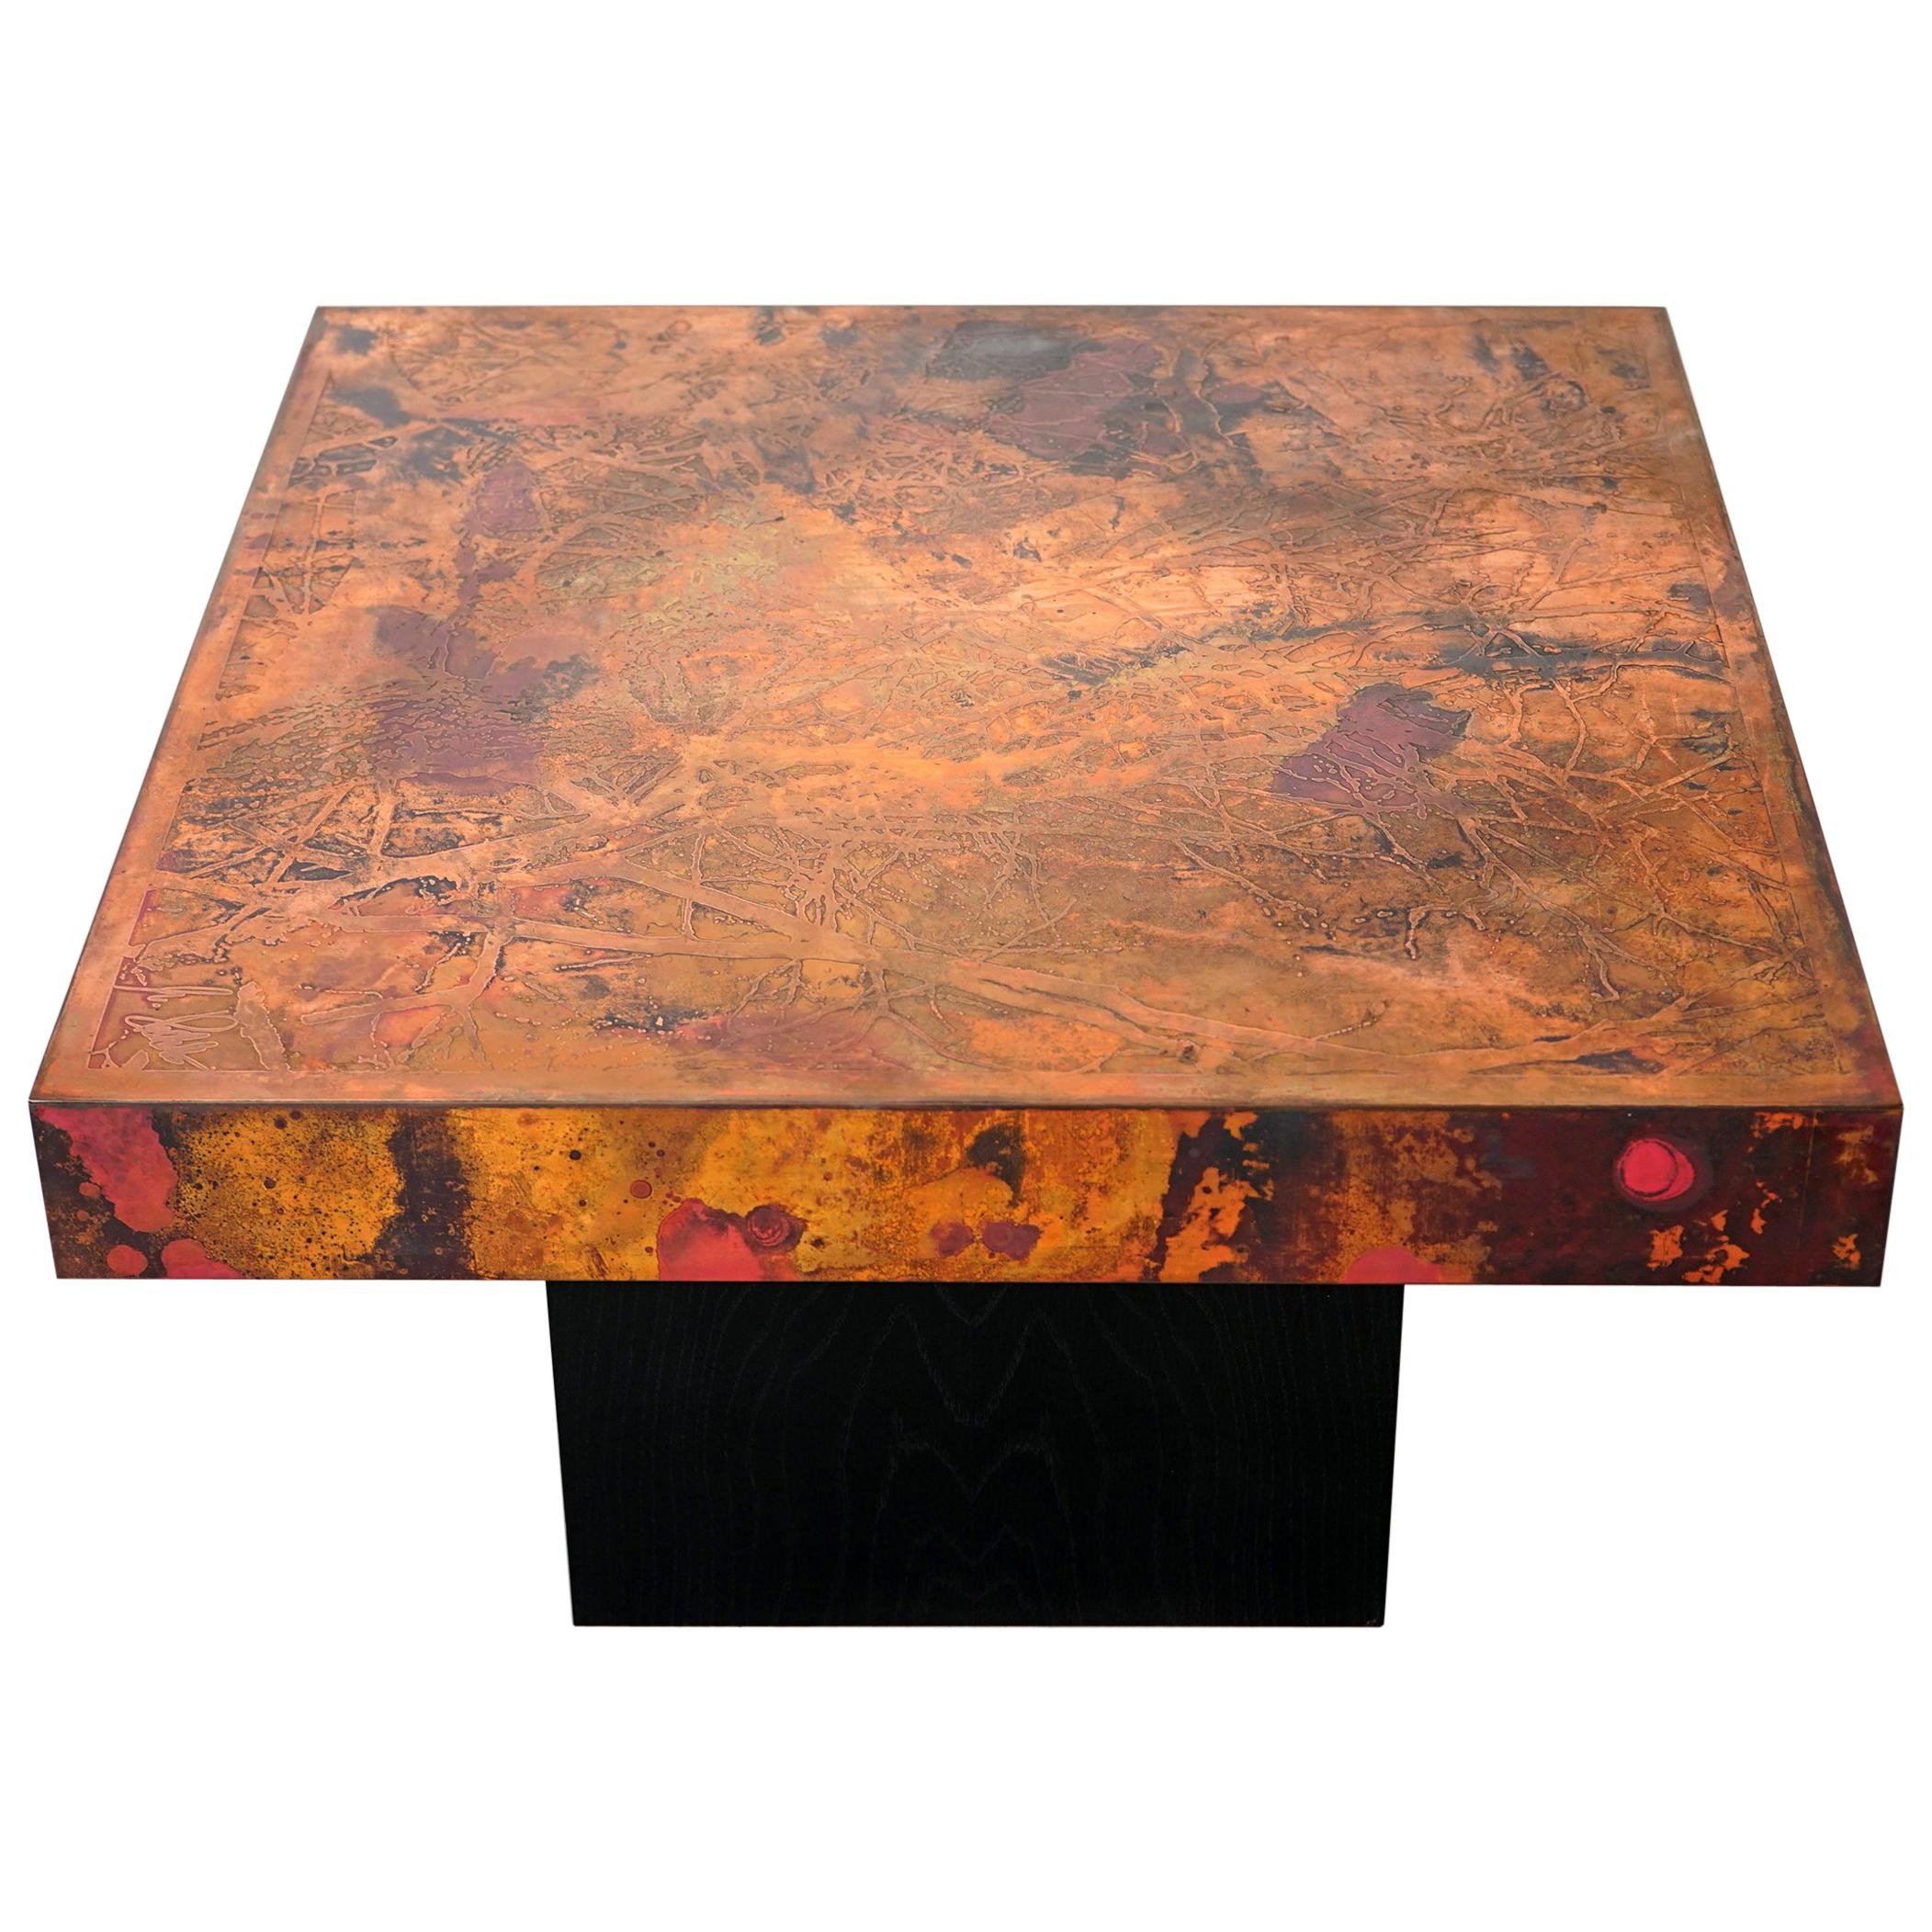 Coffee Table by Bernhard Rohne, 1966, Oxidized and Etched Copper